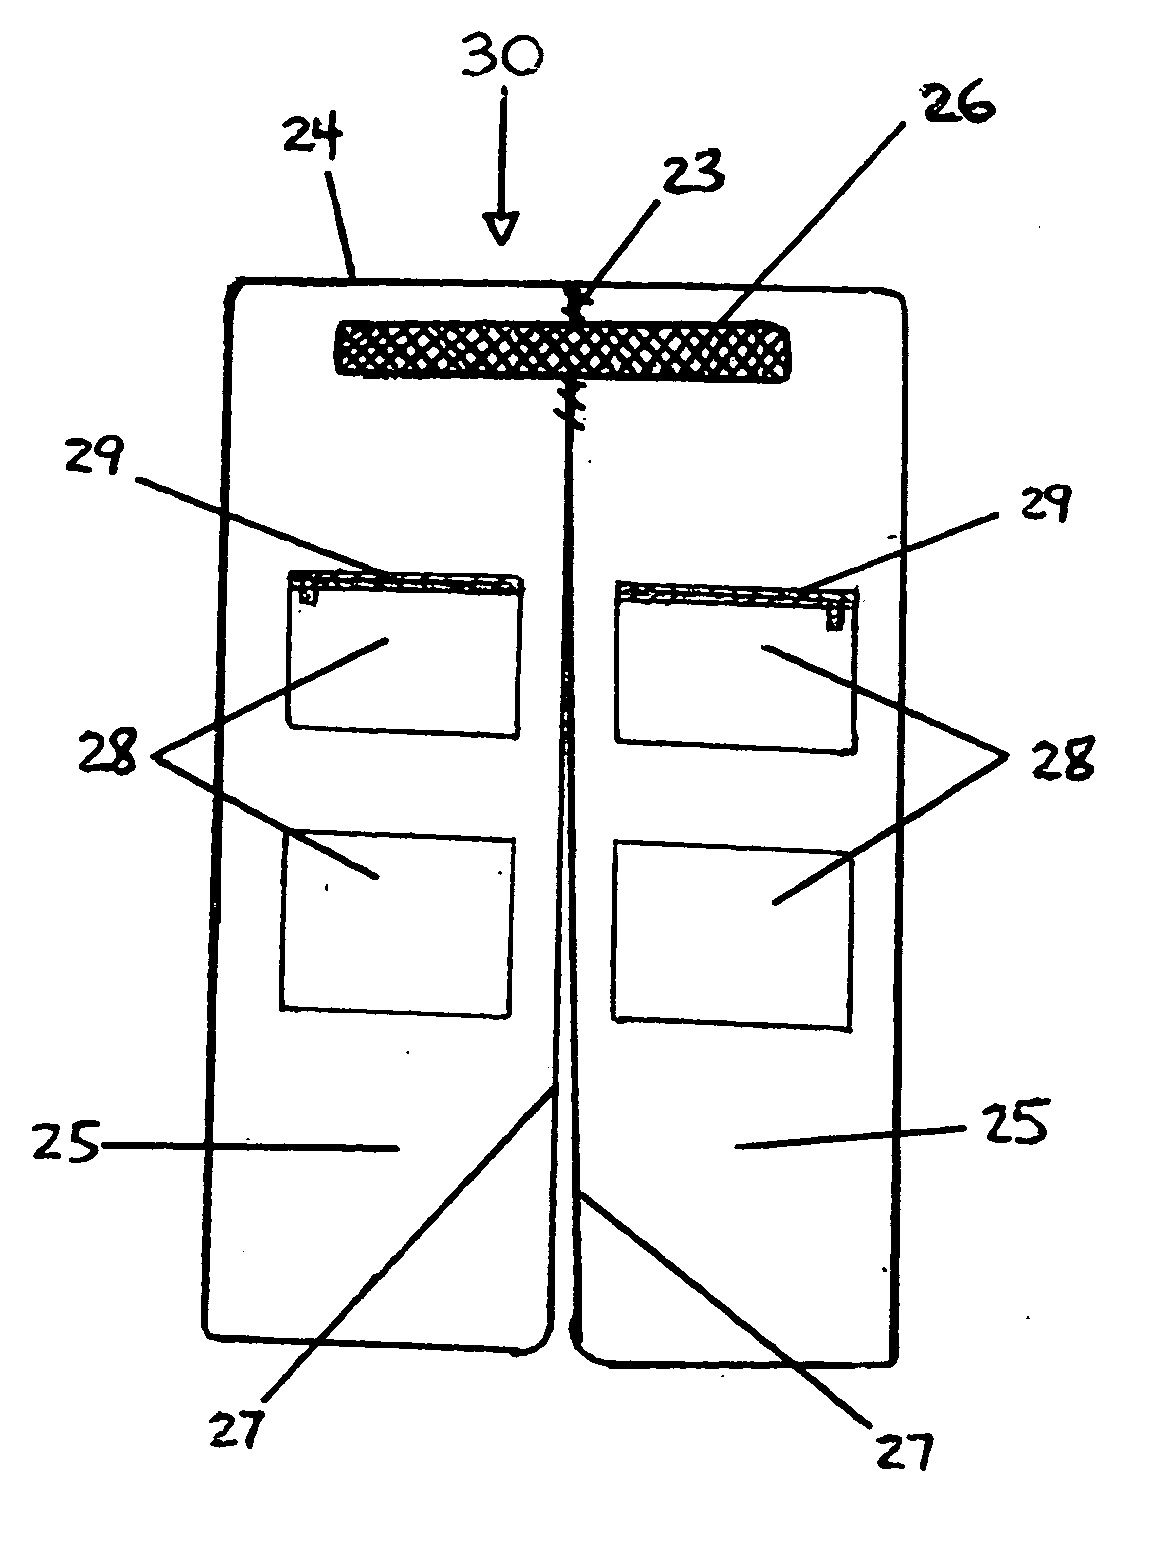 Seat garment and storage device